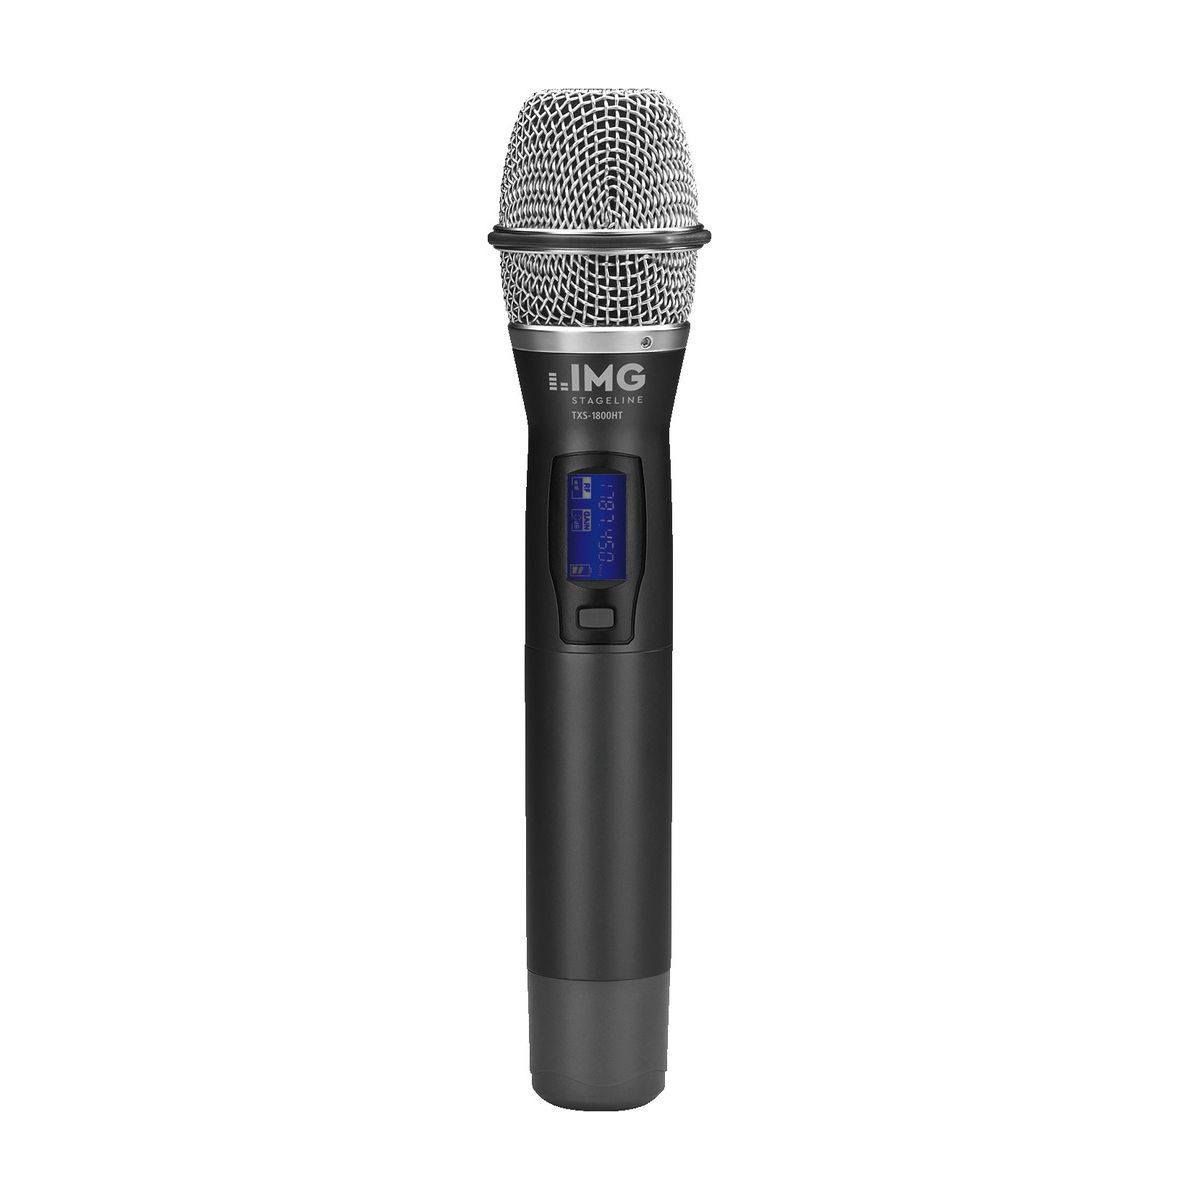 TXS-1800HT | Hand-held microphone with integrated multifrequency transmitter, 1.8 GHz-0